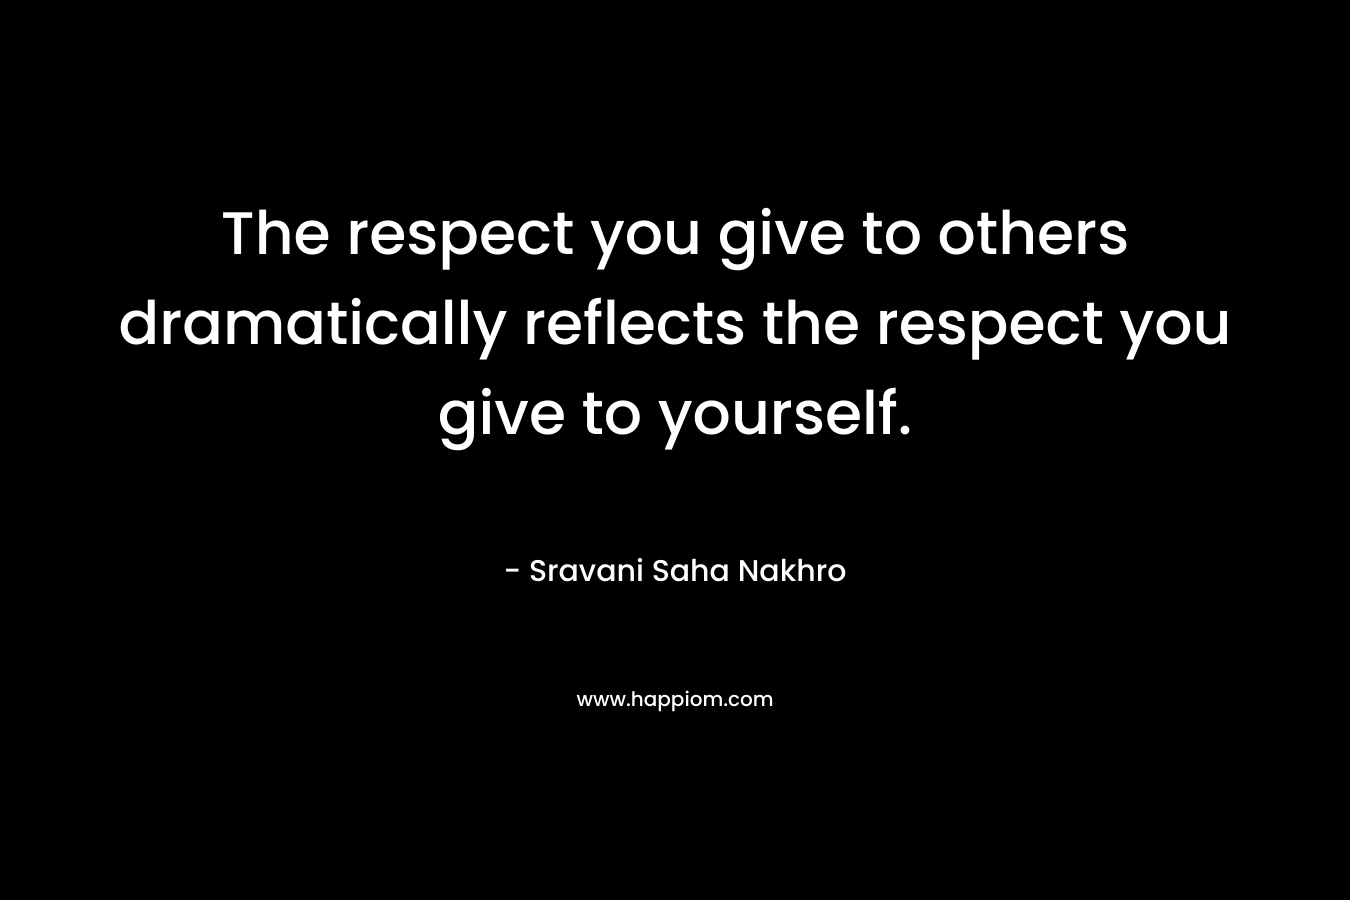 The respect you give to others dramatically reflects the respect you give to yourself.